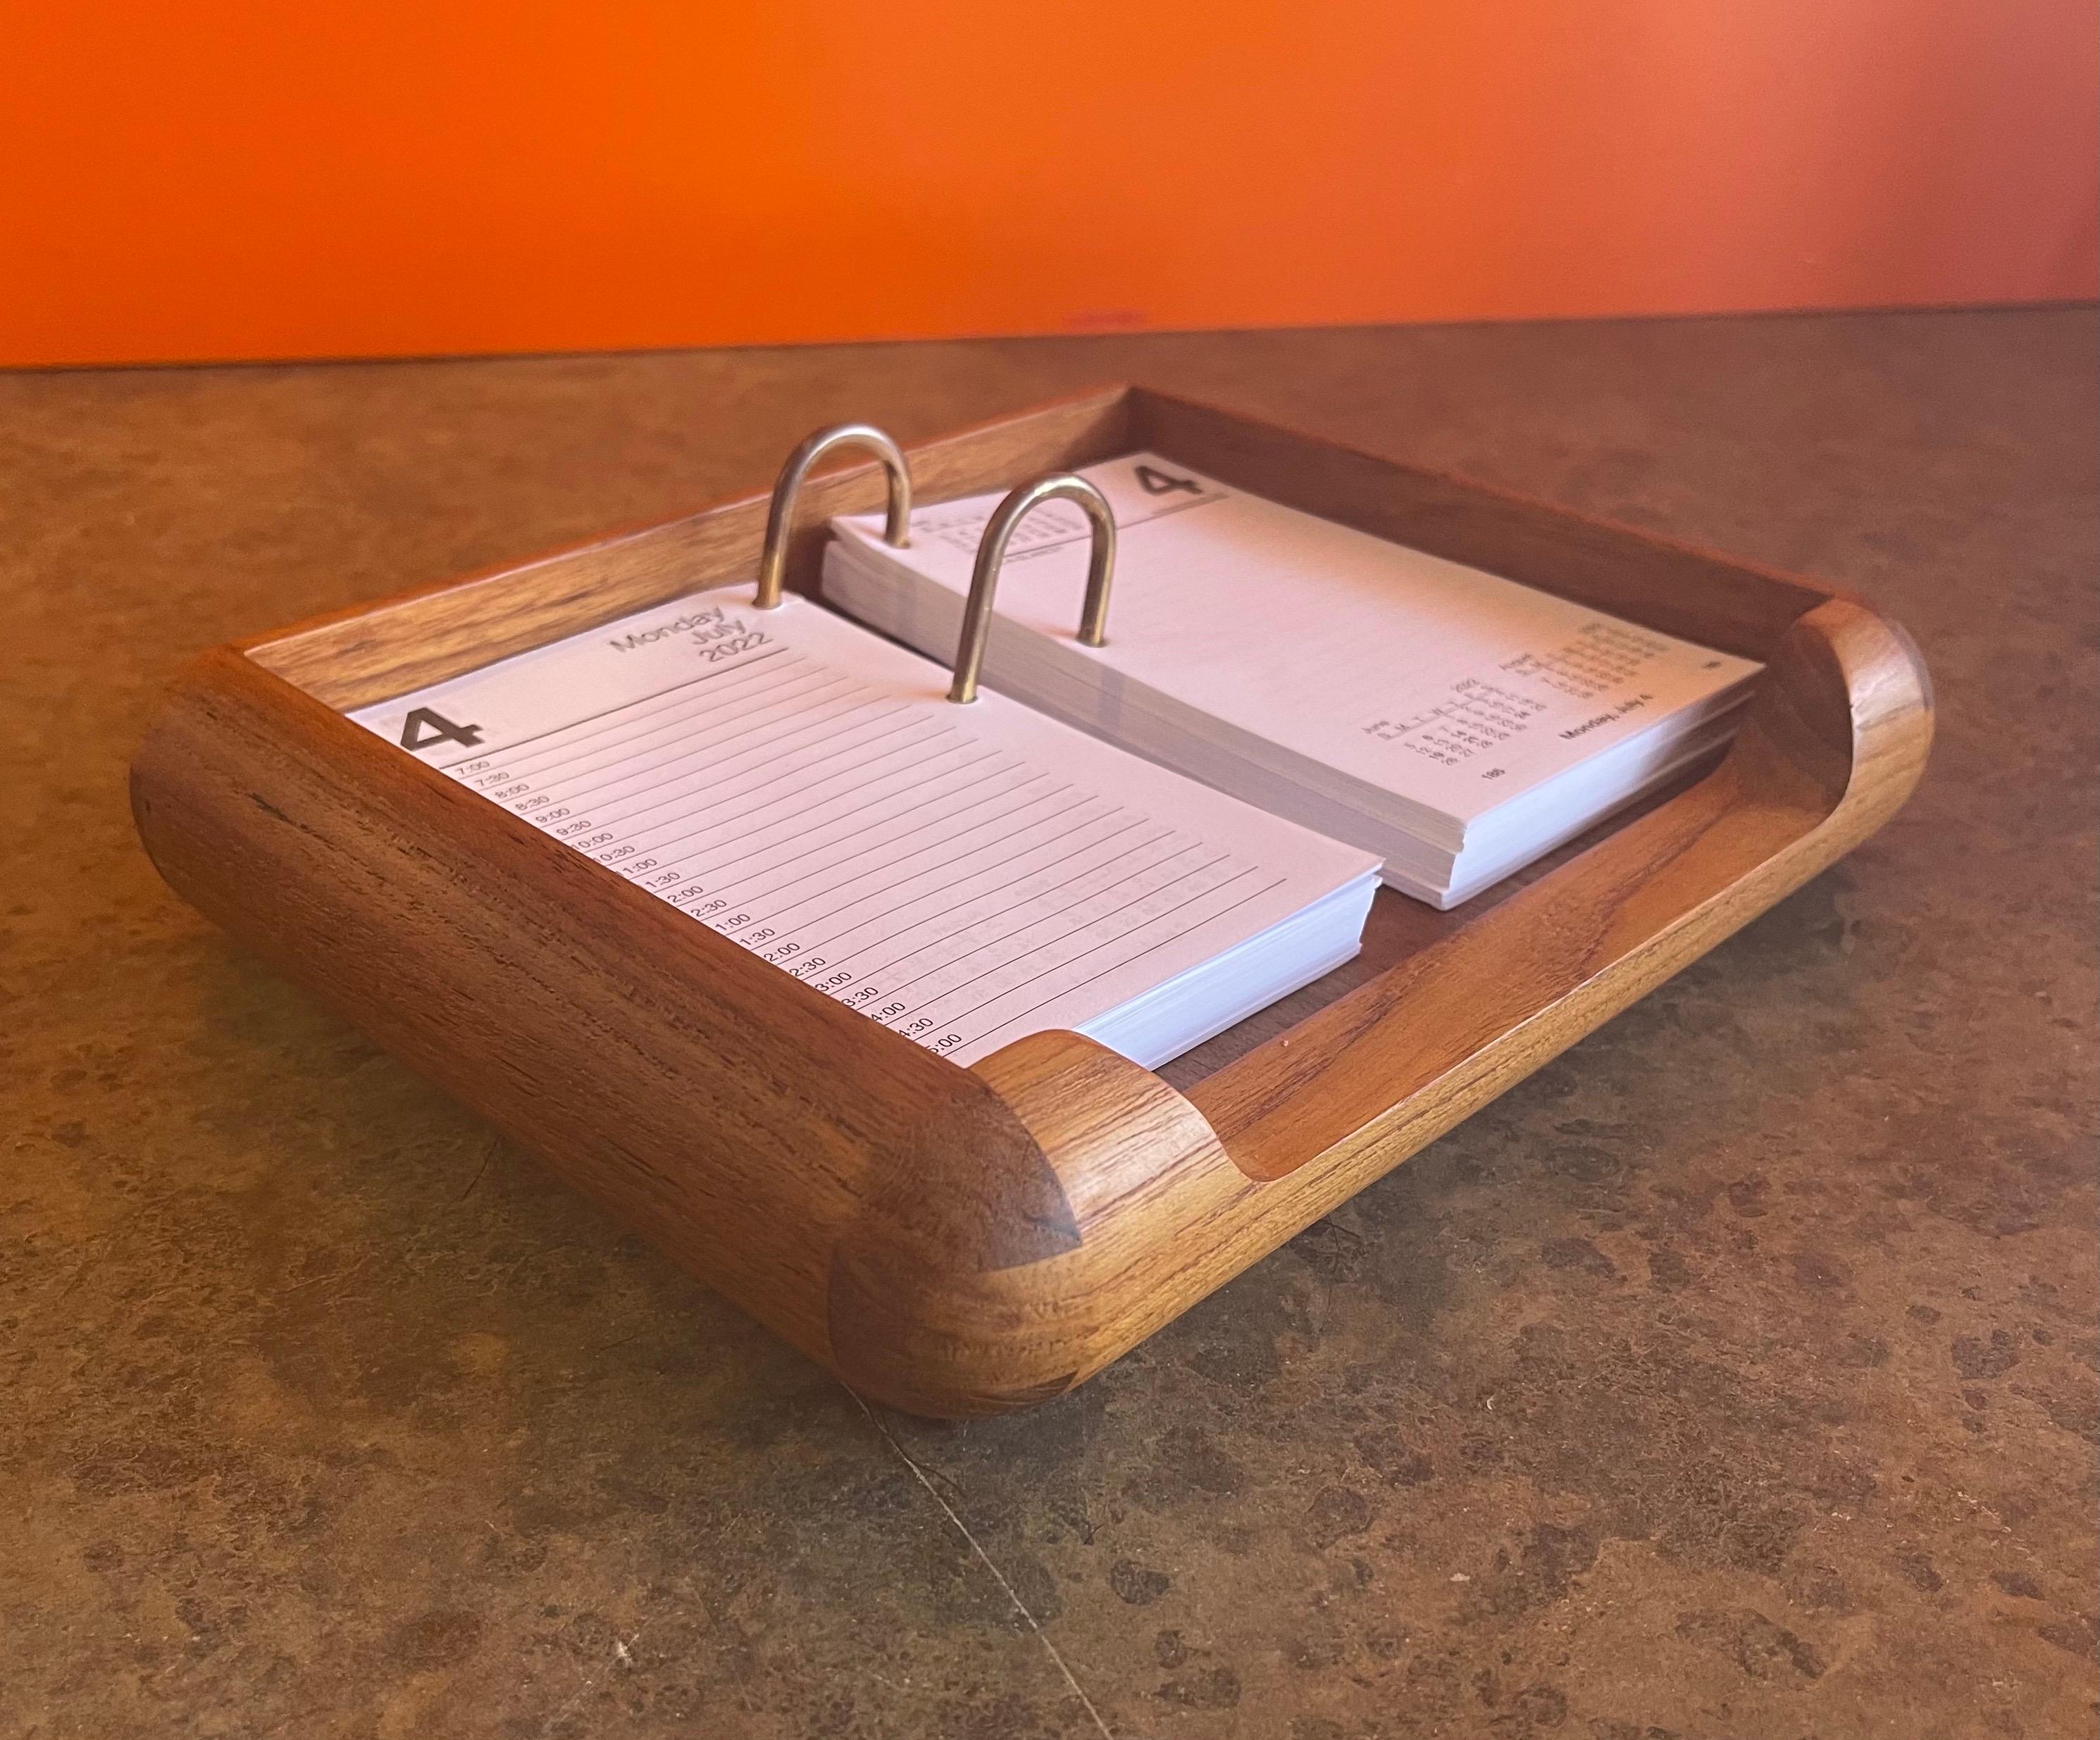 Very functional Danish modern desk loose leaf with 2022 calendar insert in teak, circa 1970s. The piece is in excellent condition and measures 9.25